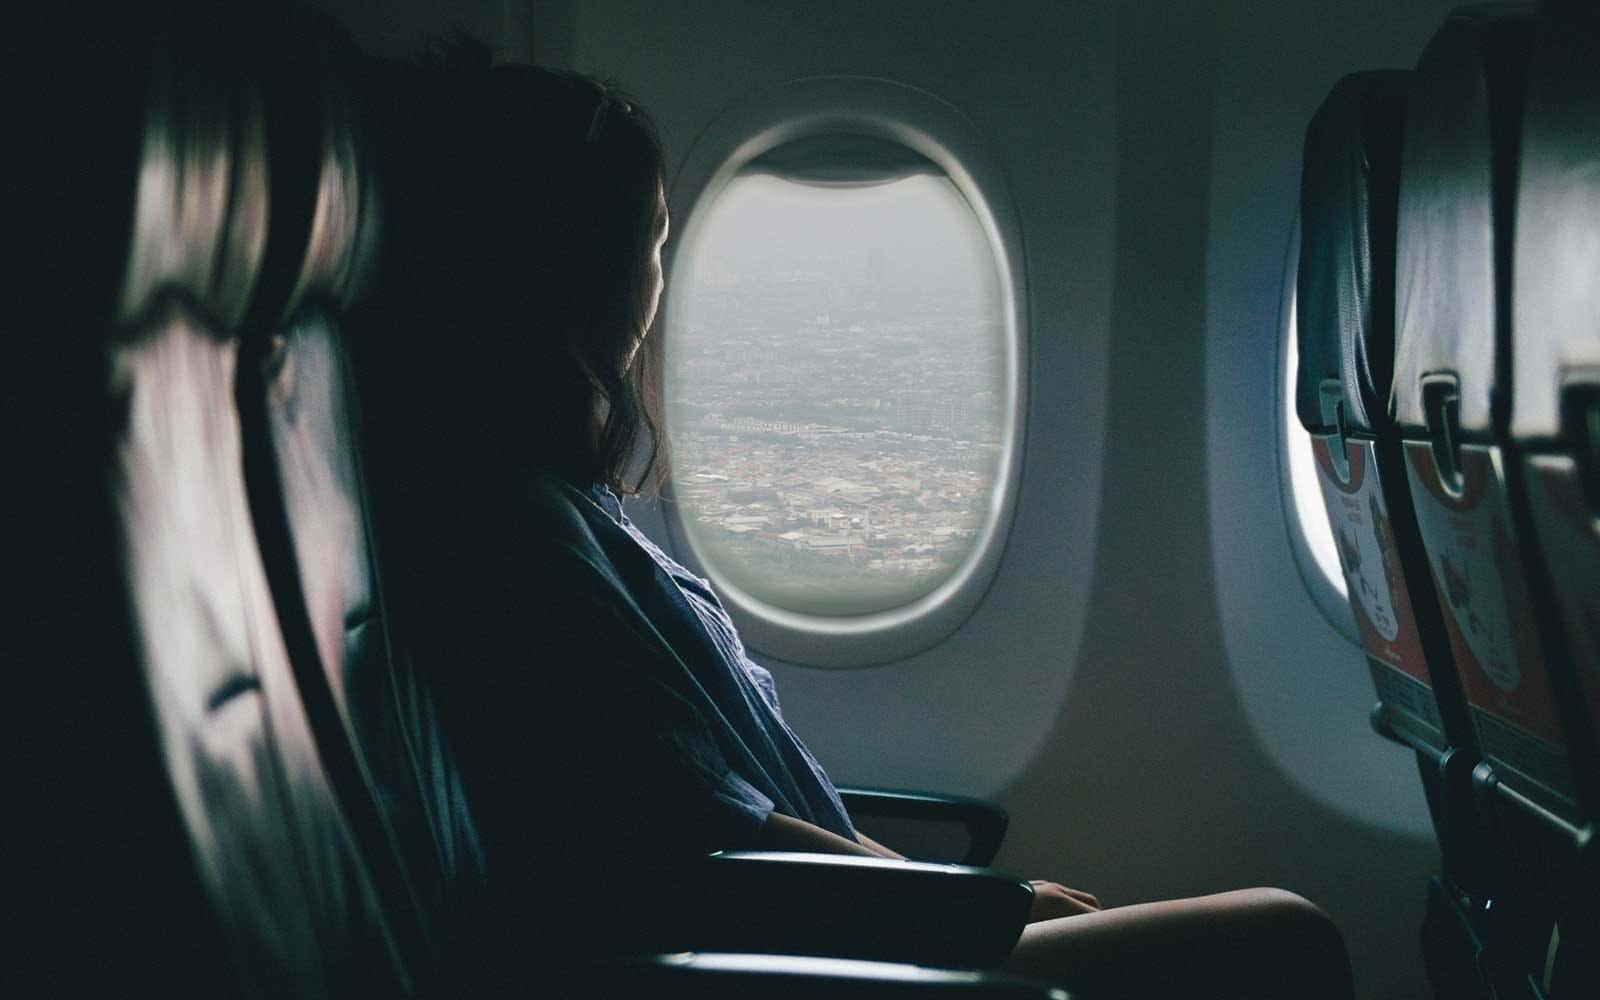 Passenger looking out plane window